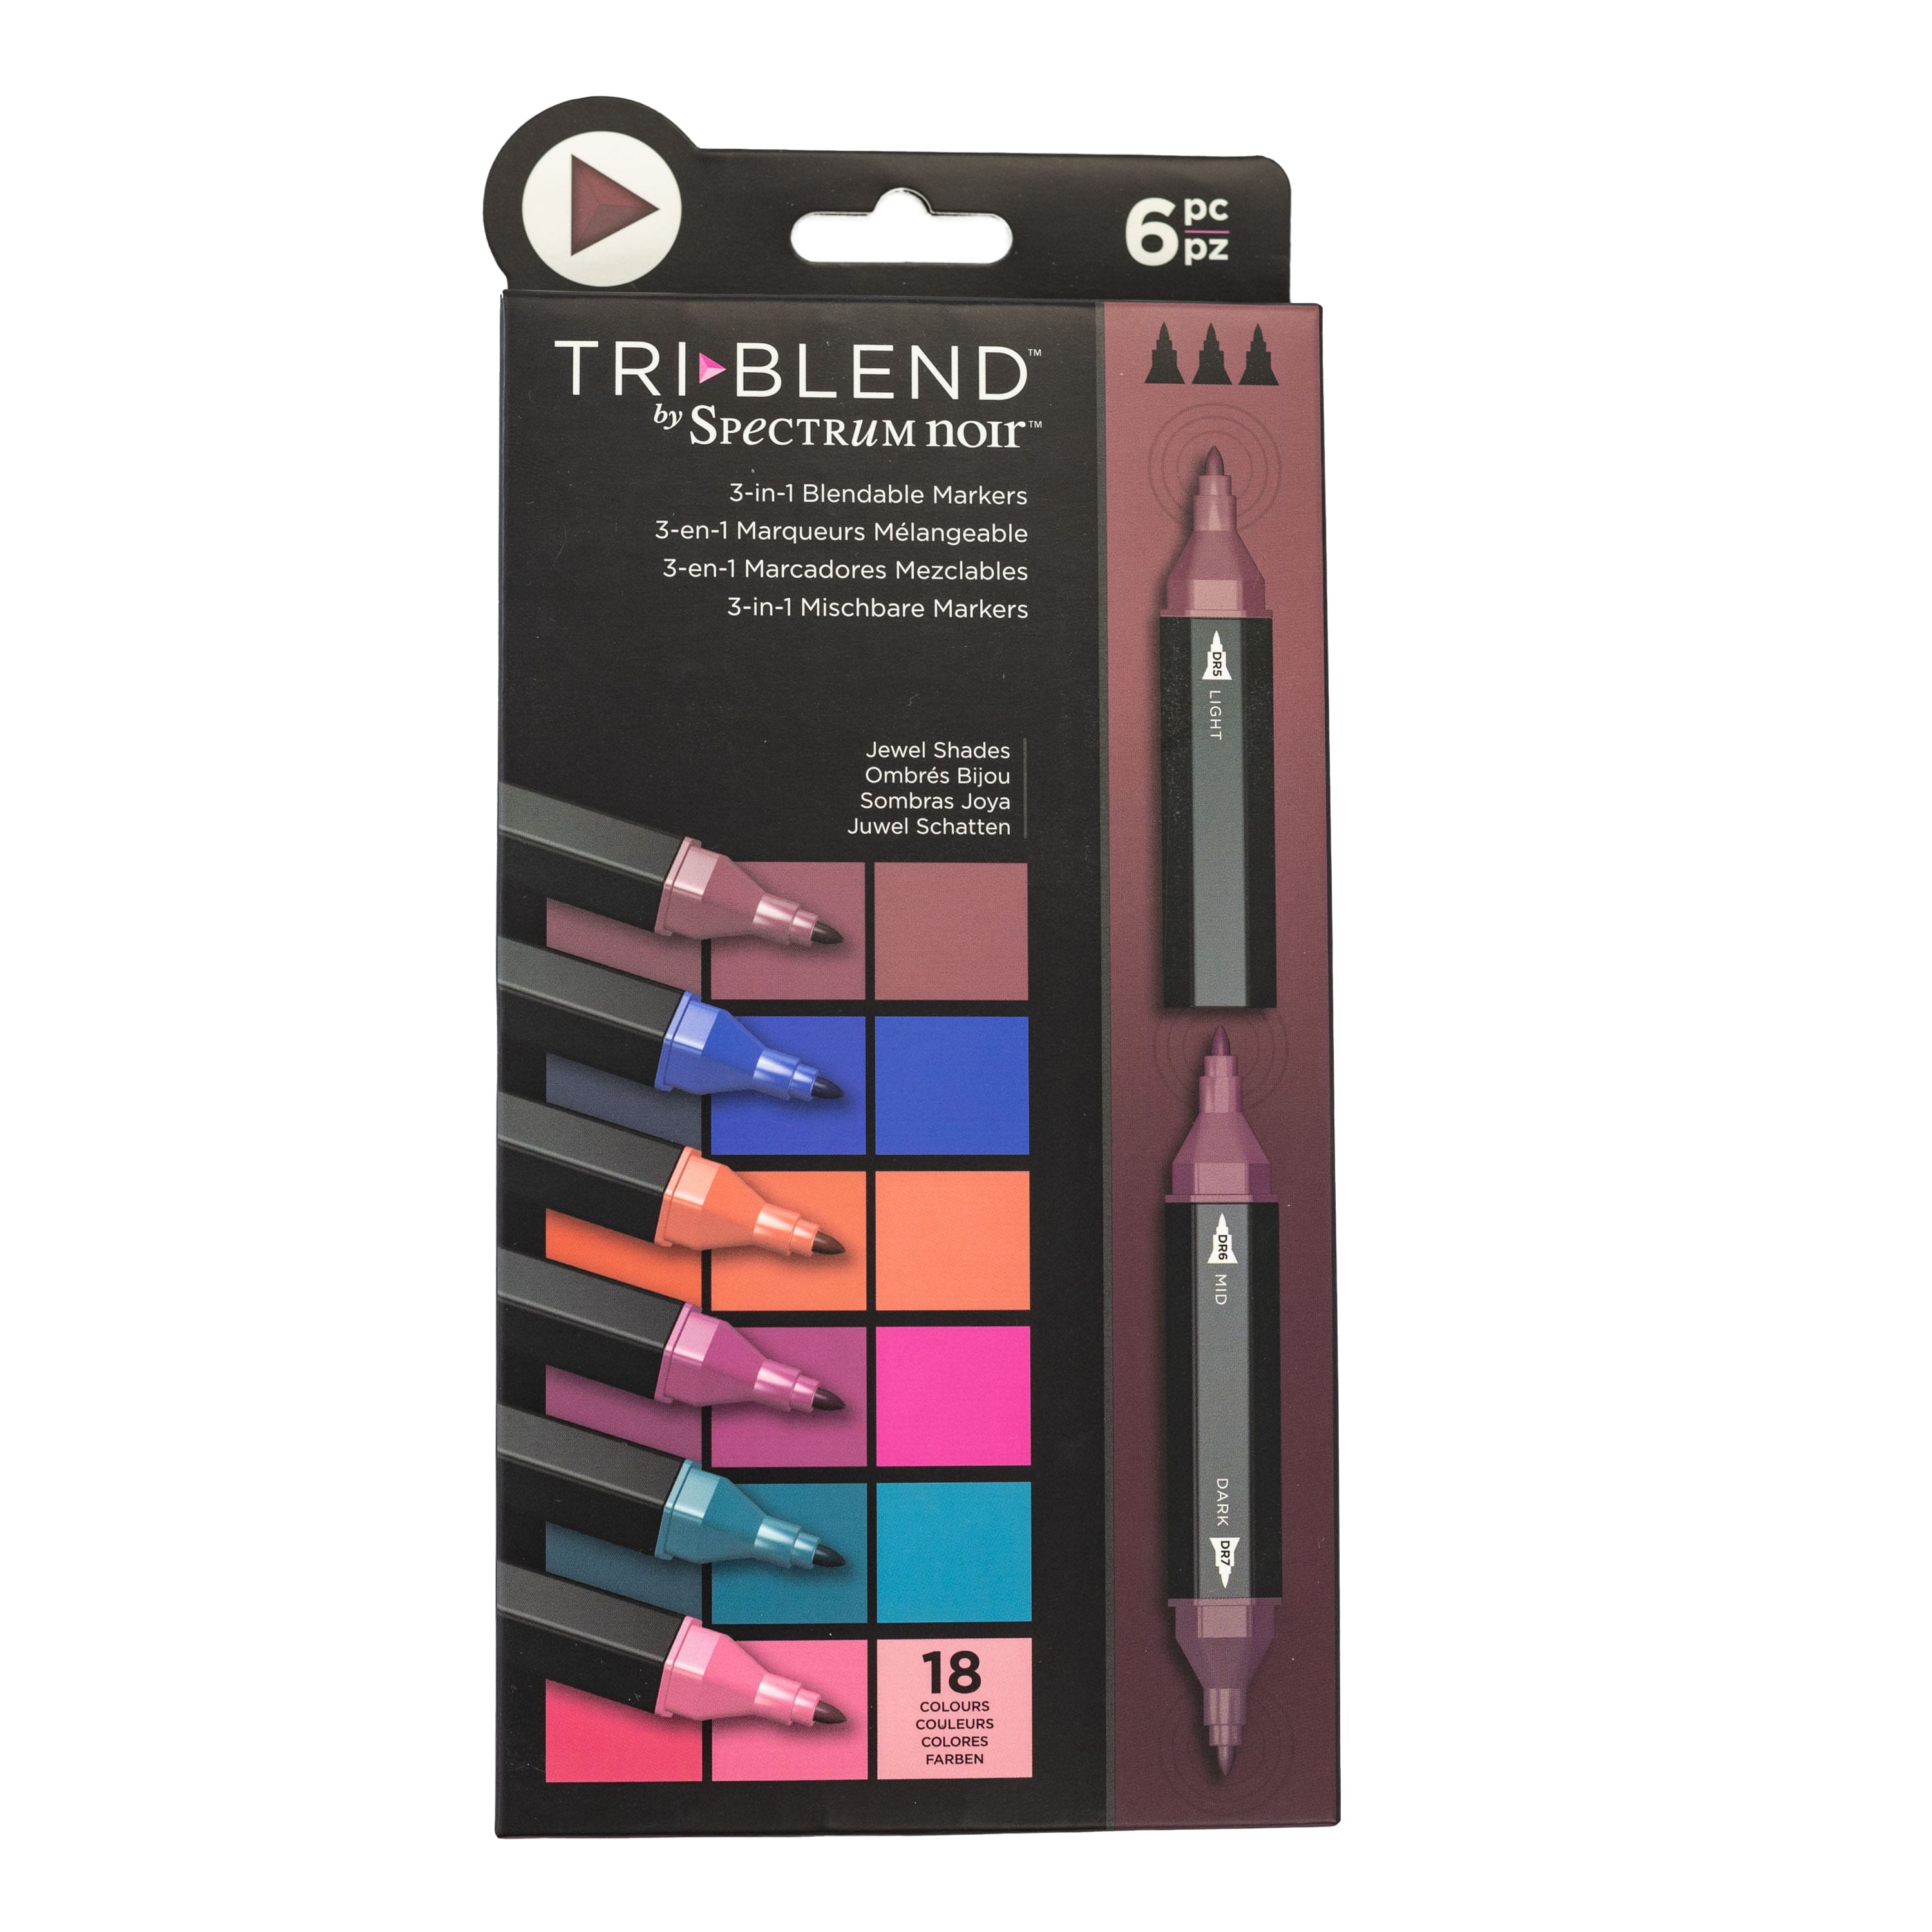 Alcohol Free Markers 